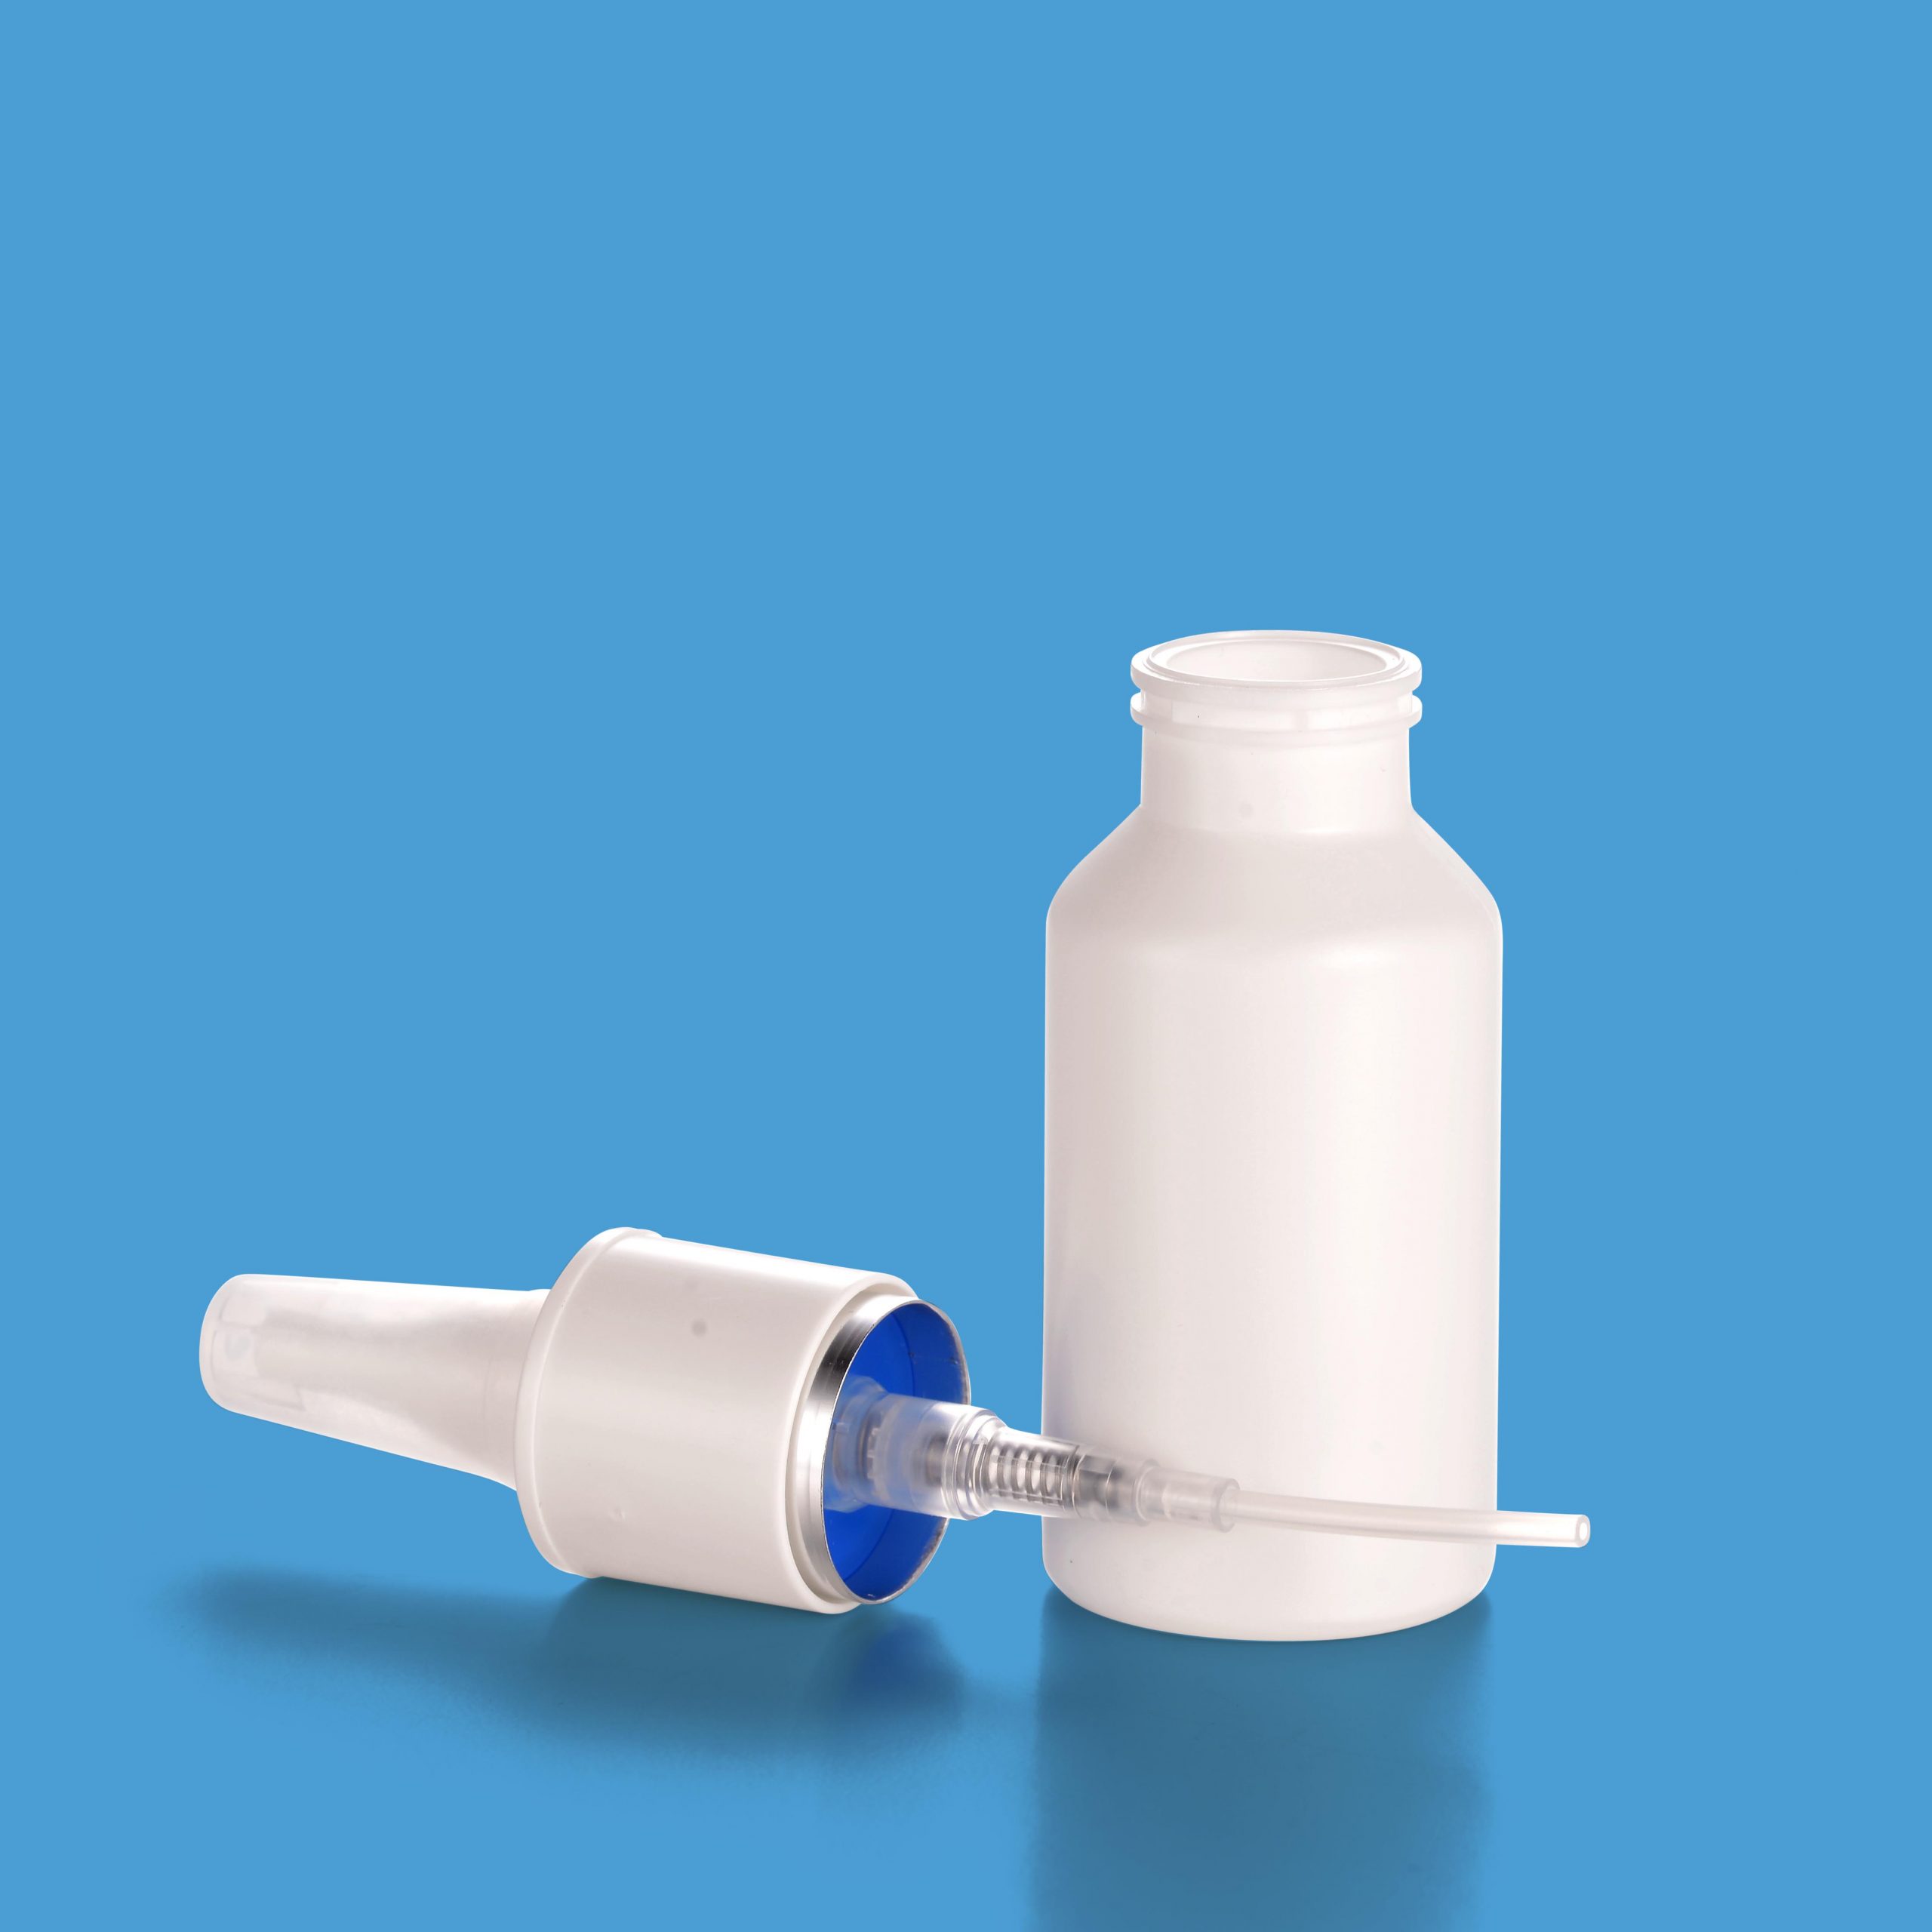 20mm Crimp on Nasal Spray Pump 100mcl: How to Use It Correctly?